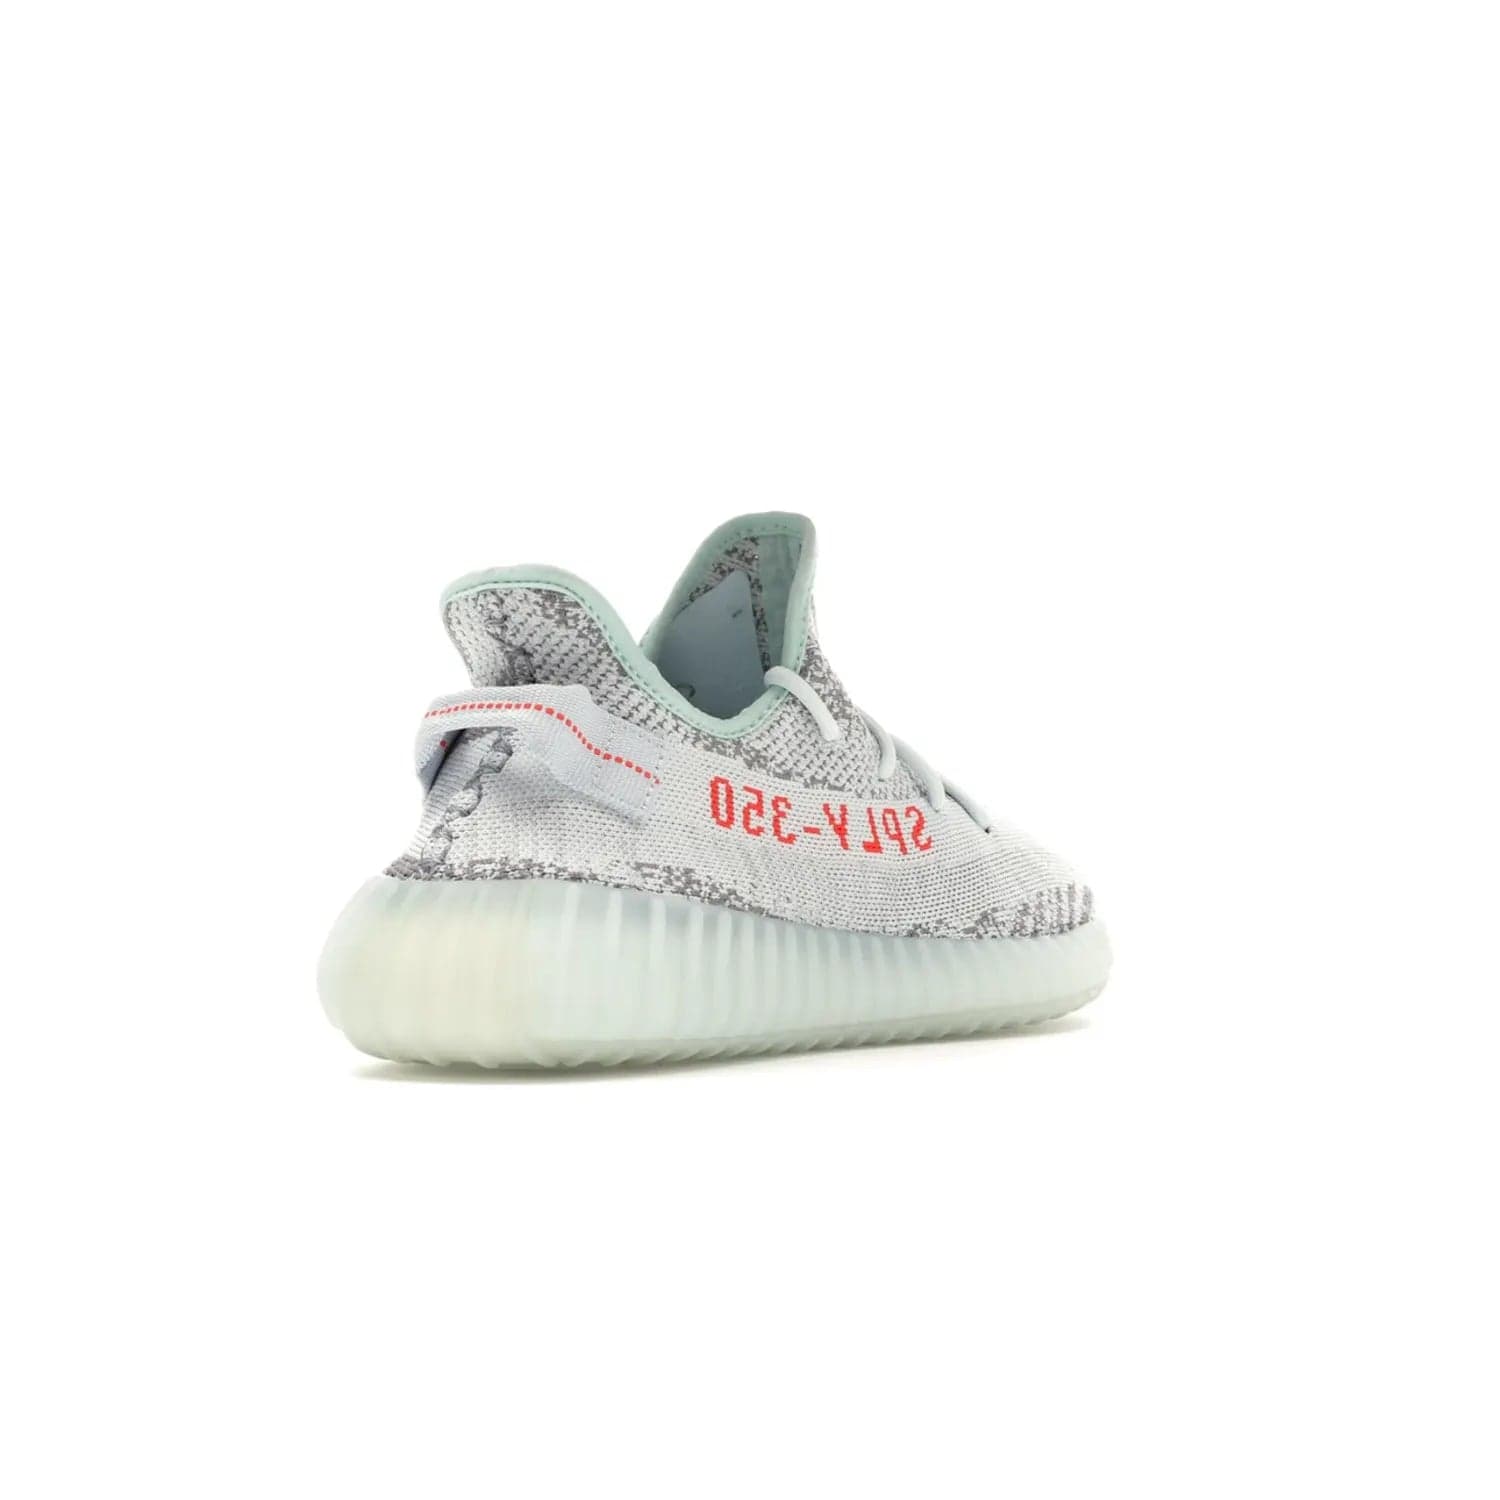 adidas Yeezy Boost 350 V2 Blue Tint - Image 32 - Only at www.BallersClubKickz.com - The adidas Yeezy Boost 350 V2 Blue Tint merges fashion and functionality with its Primeknit upper and Boost sole. Released in December 2017, this luxurious sneaker is perfect for making a stylish statement.